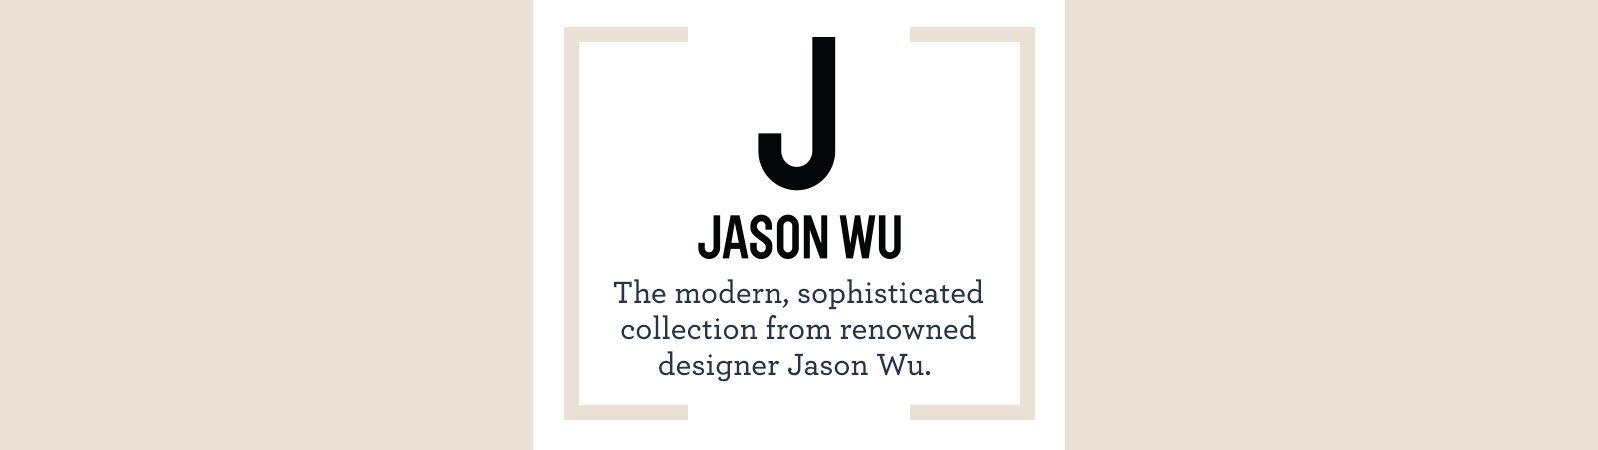 J Jason Wu The modern, sophisticated collection from renowned designer Jason Wu